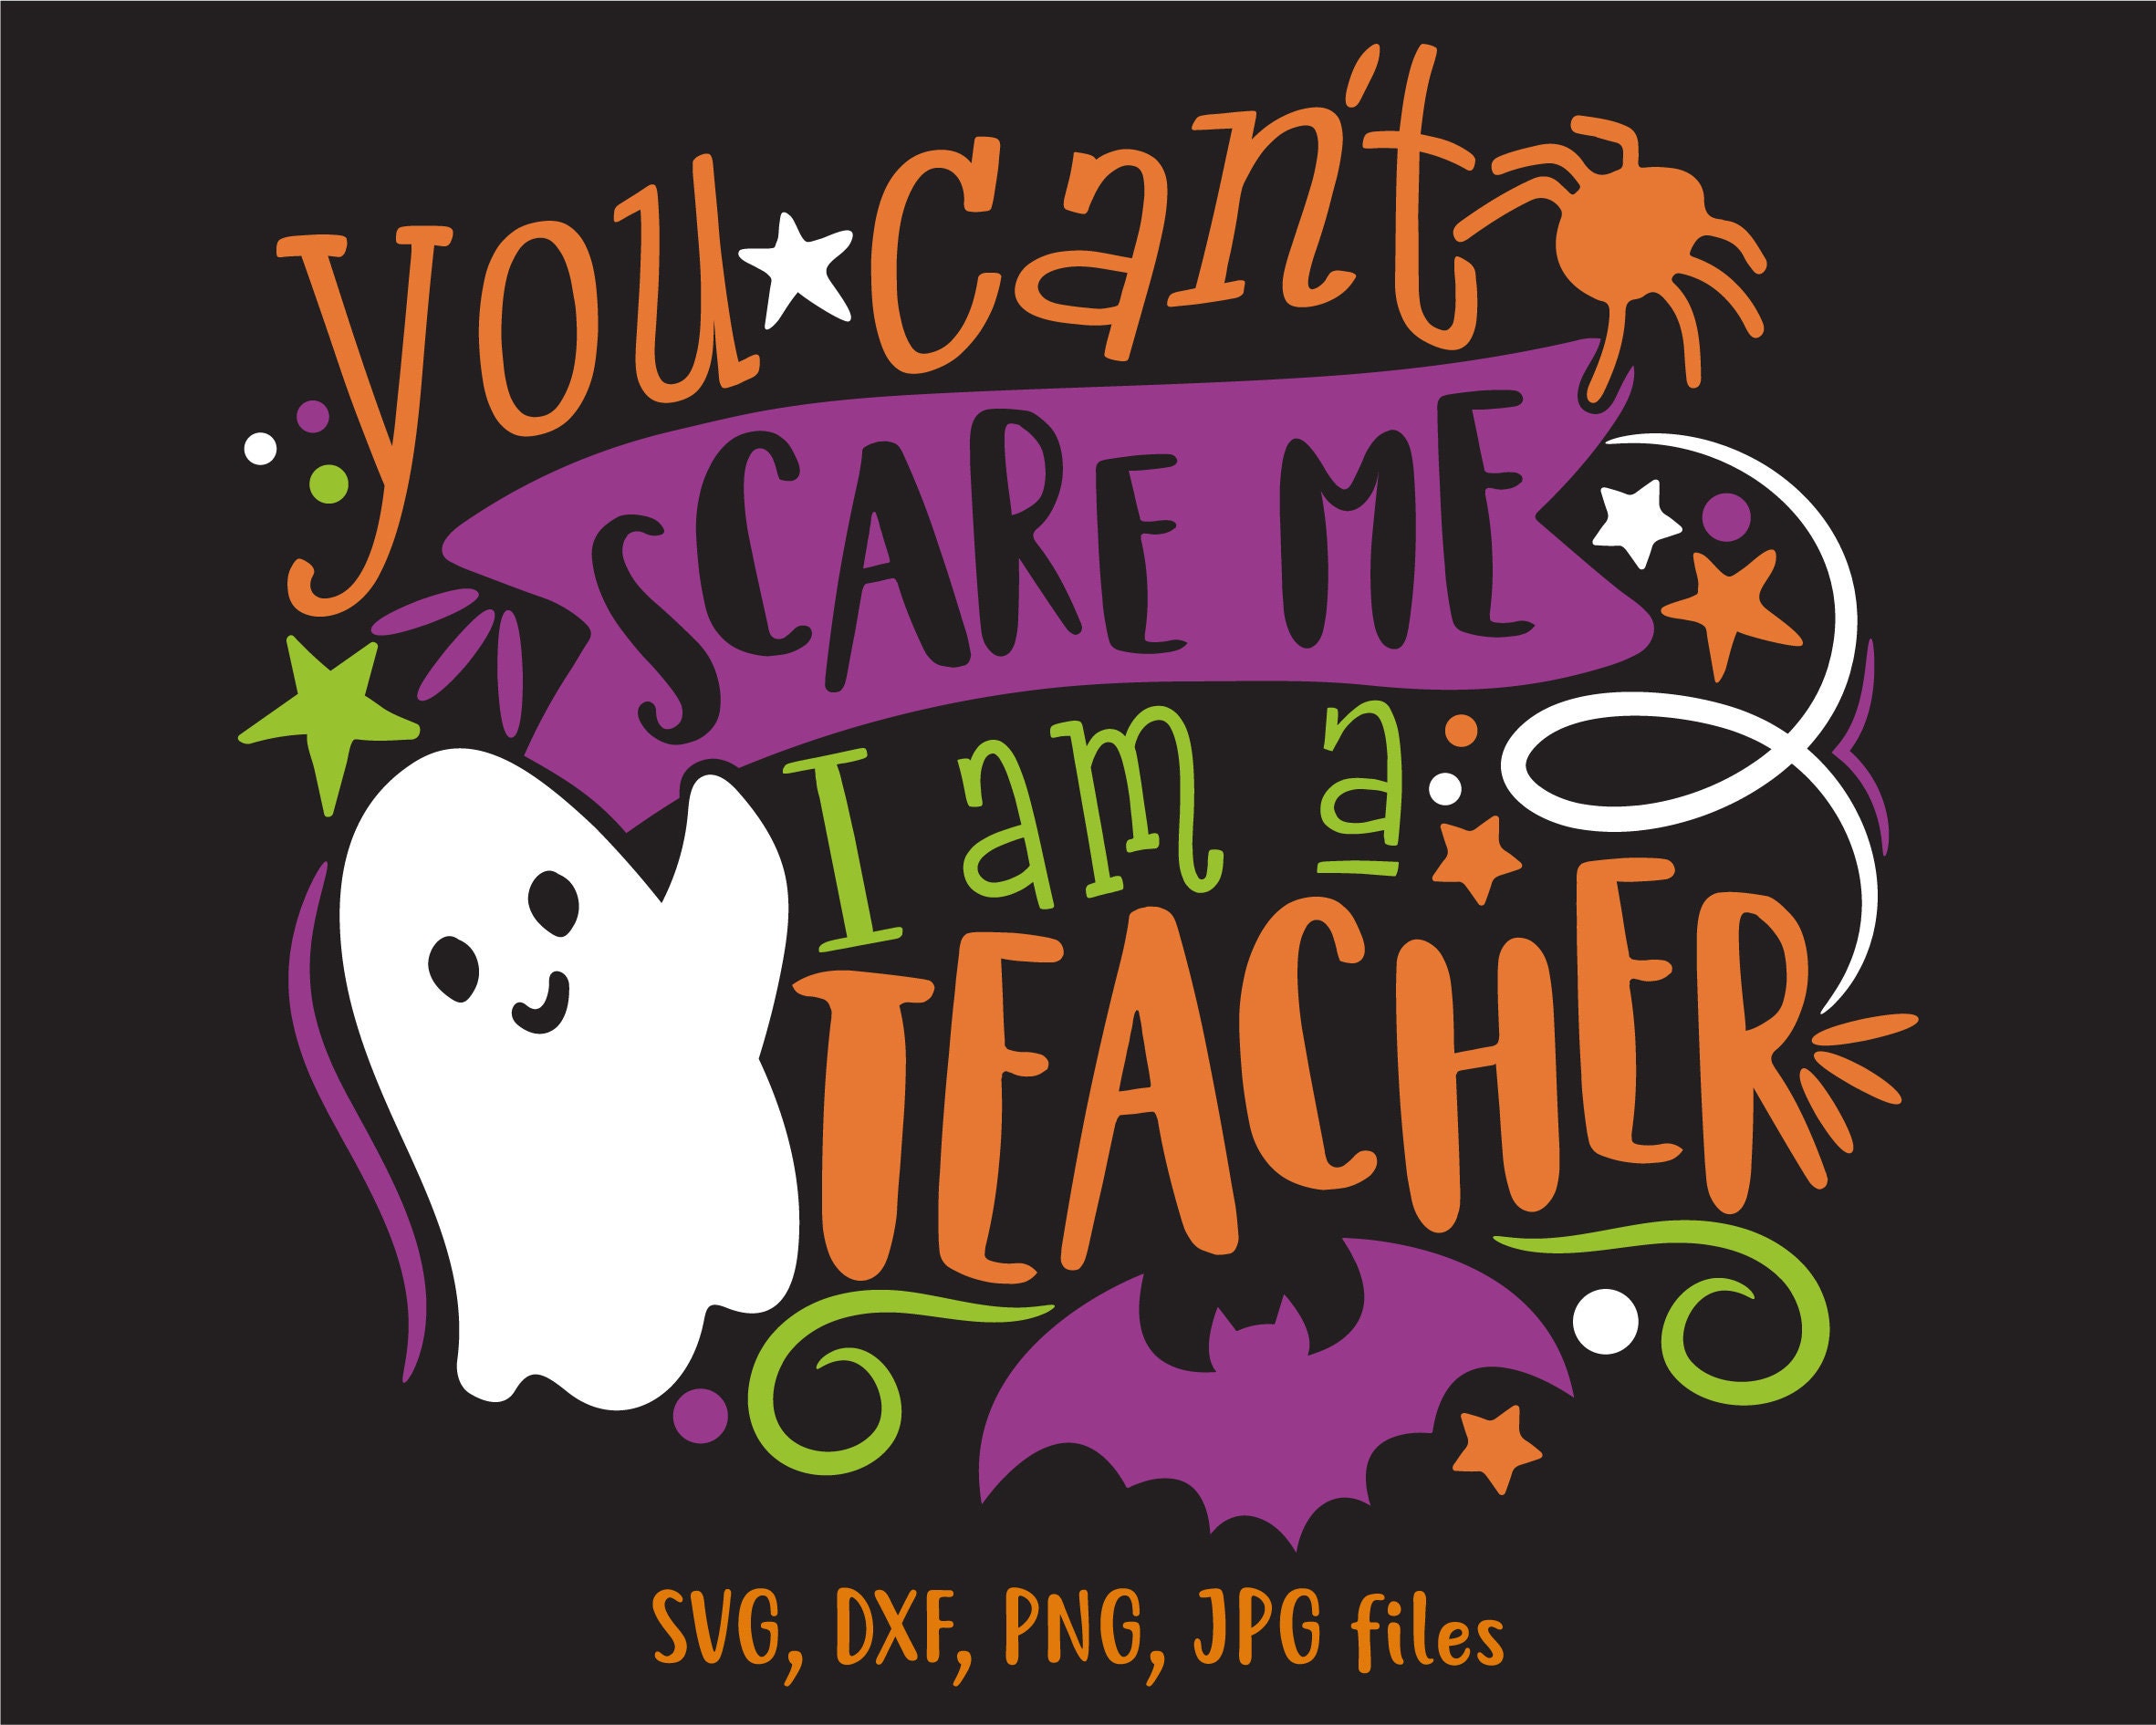 Casual everyday fall teacher Halloween outfit costume featuring a graphic scary  teacher tee, loose str…